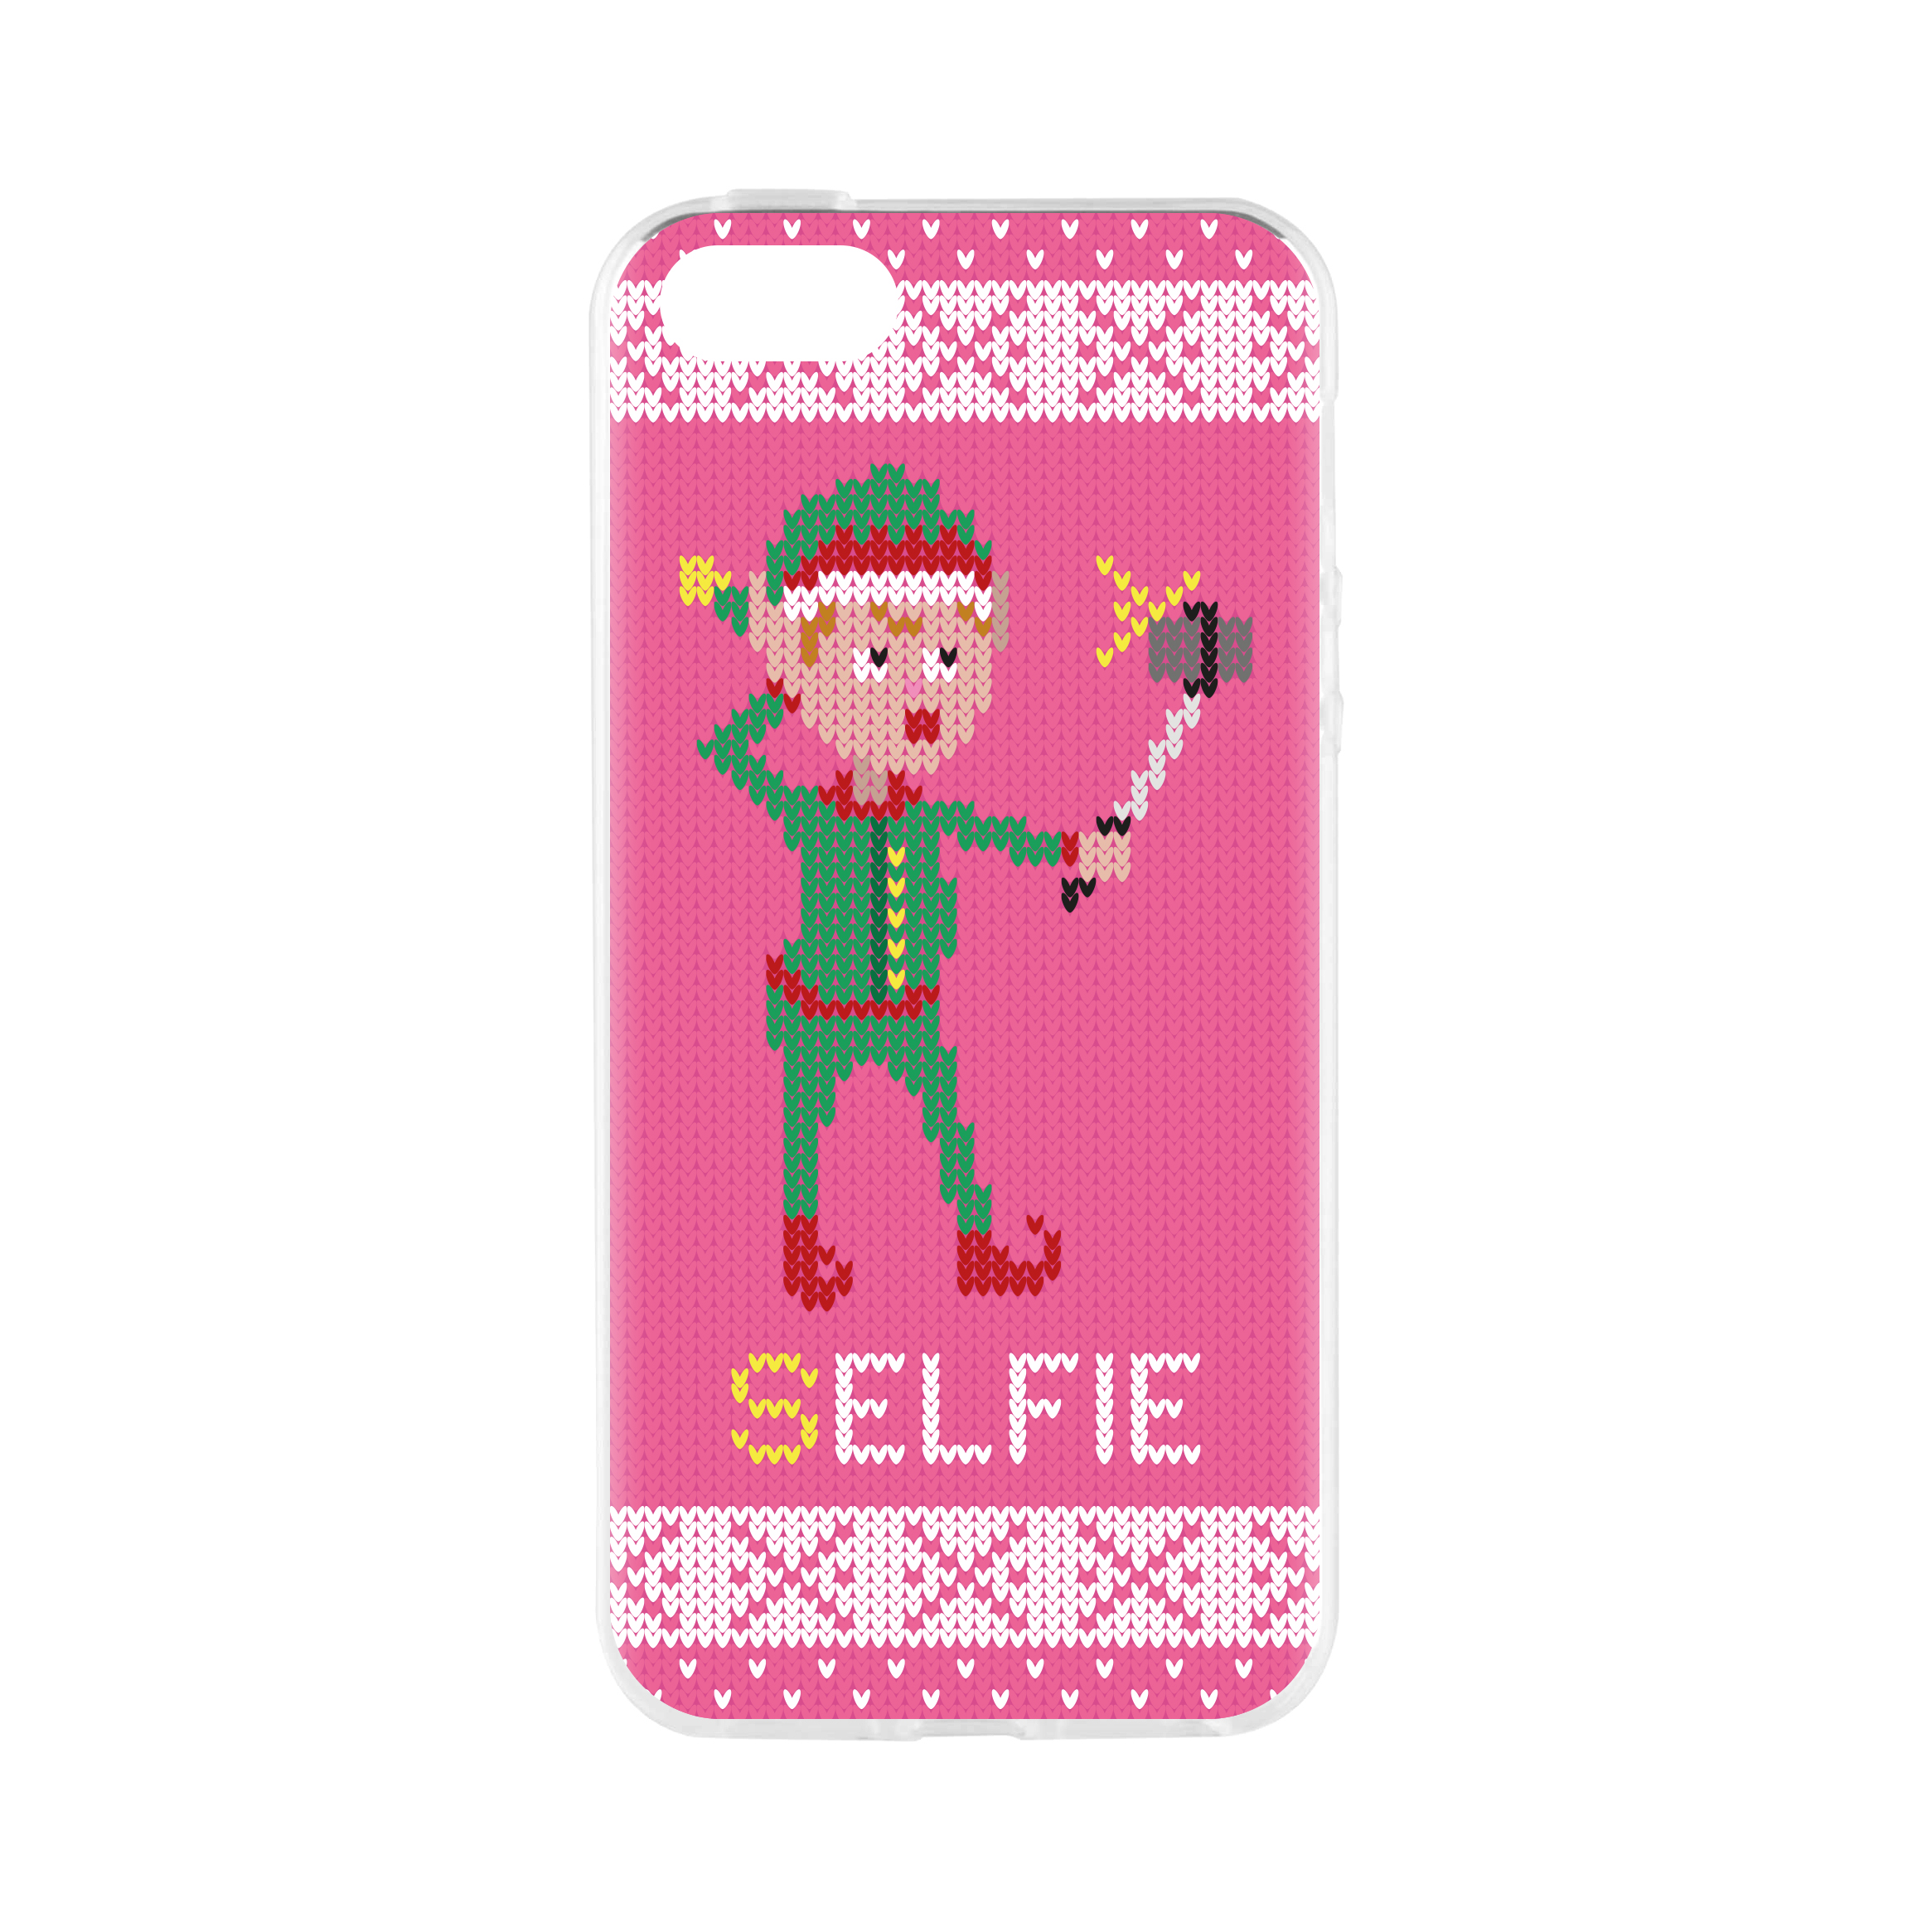 Ugly Case 5/5S/SE, Backcover, APPLE, Elfie, Selfie COLOURFUL IPHONE Sweater Xmas FLAVR